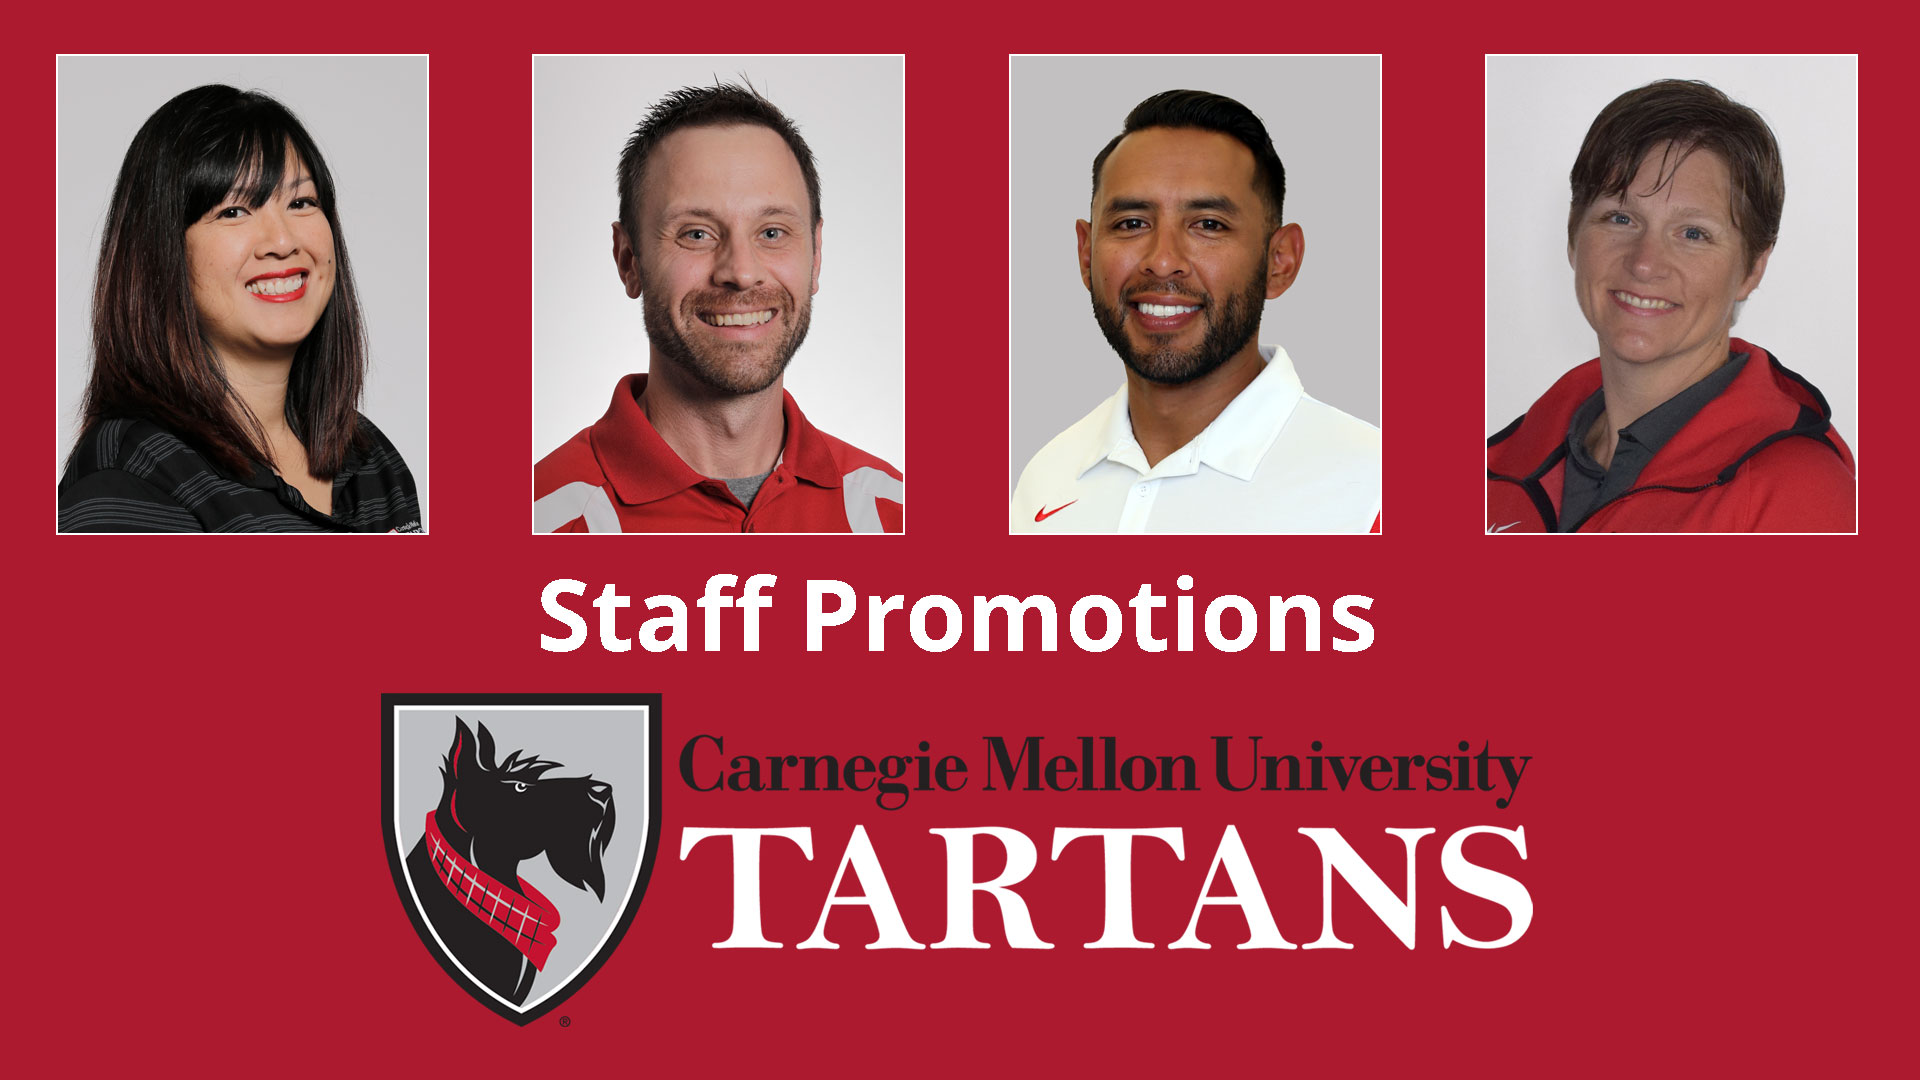 four portrait photos of two women and two men with text reading staff promotions and the Carnegie Mellon Tartans logo